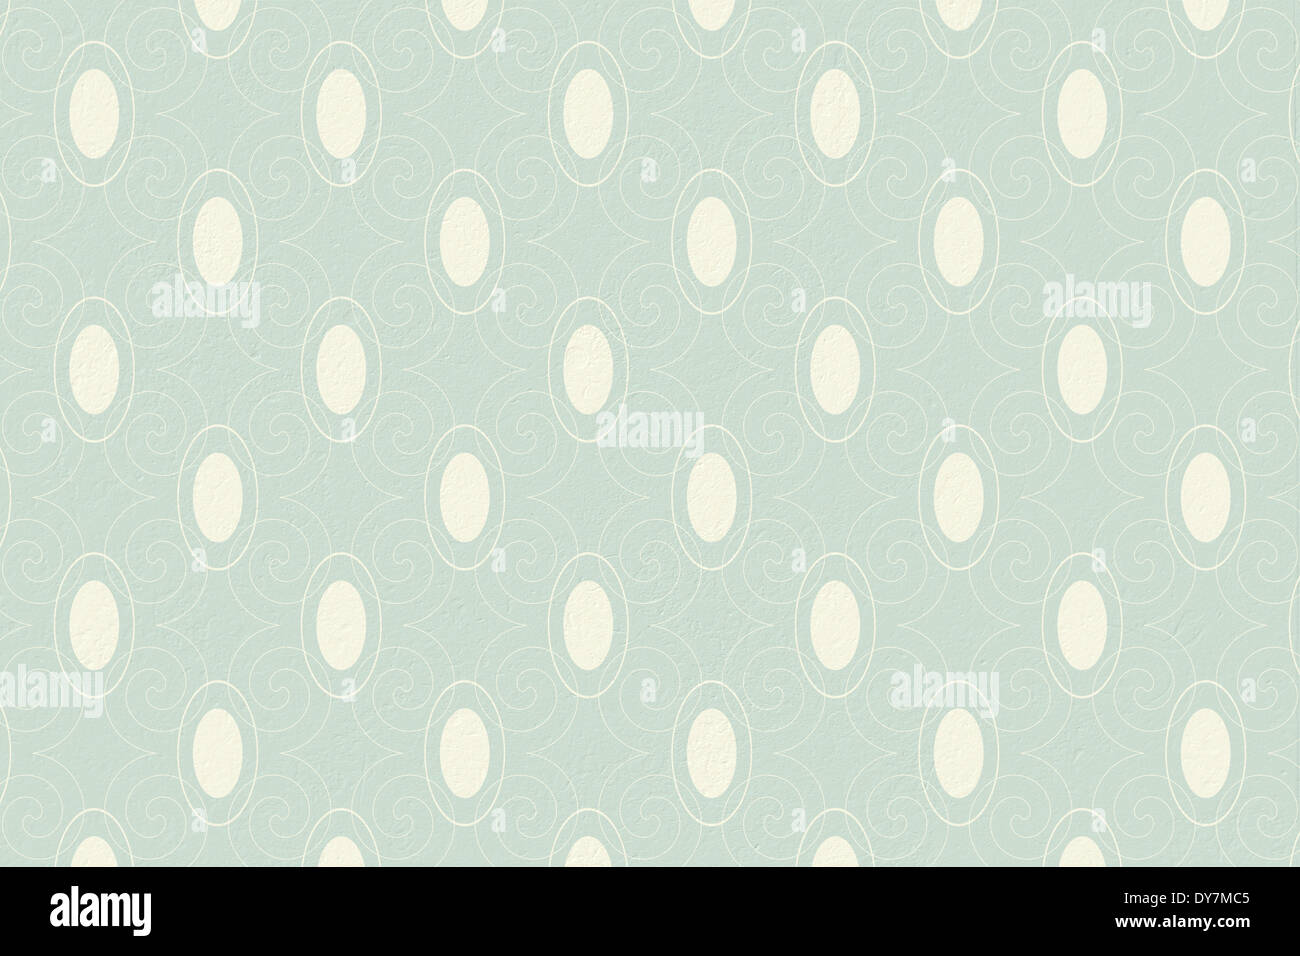 Blue and cream patterned wallpaper Stock Photo